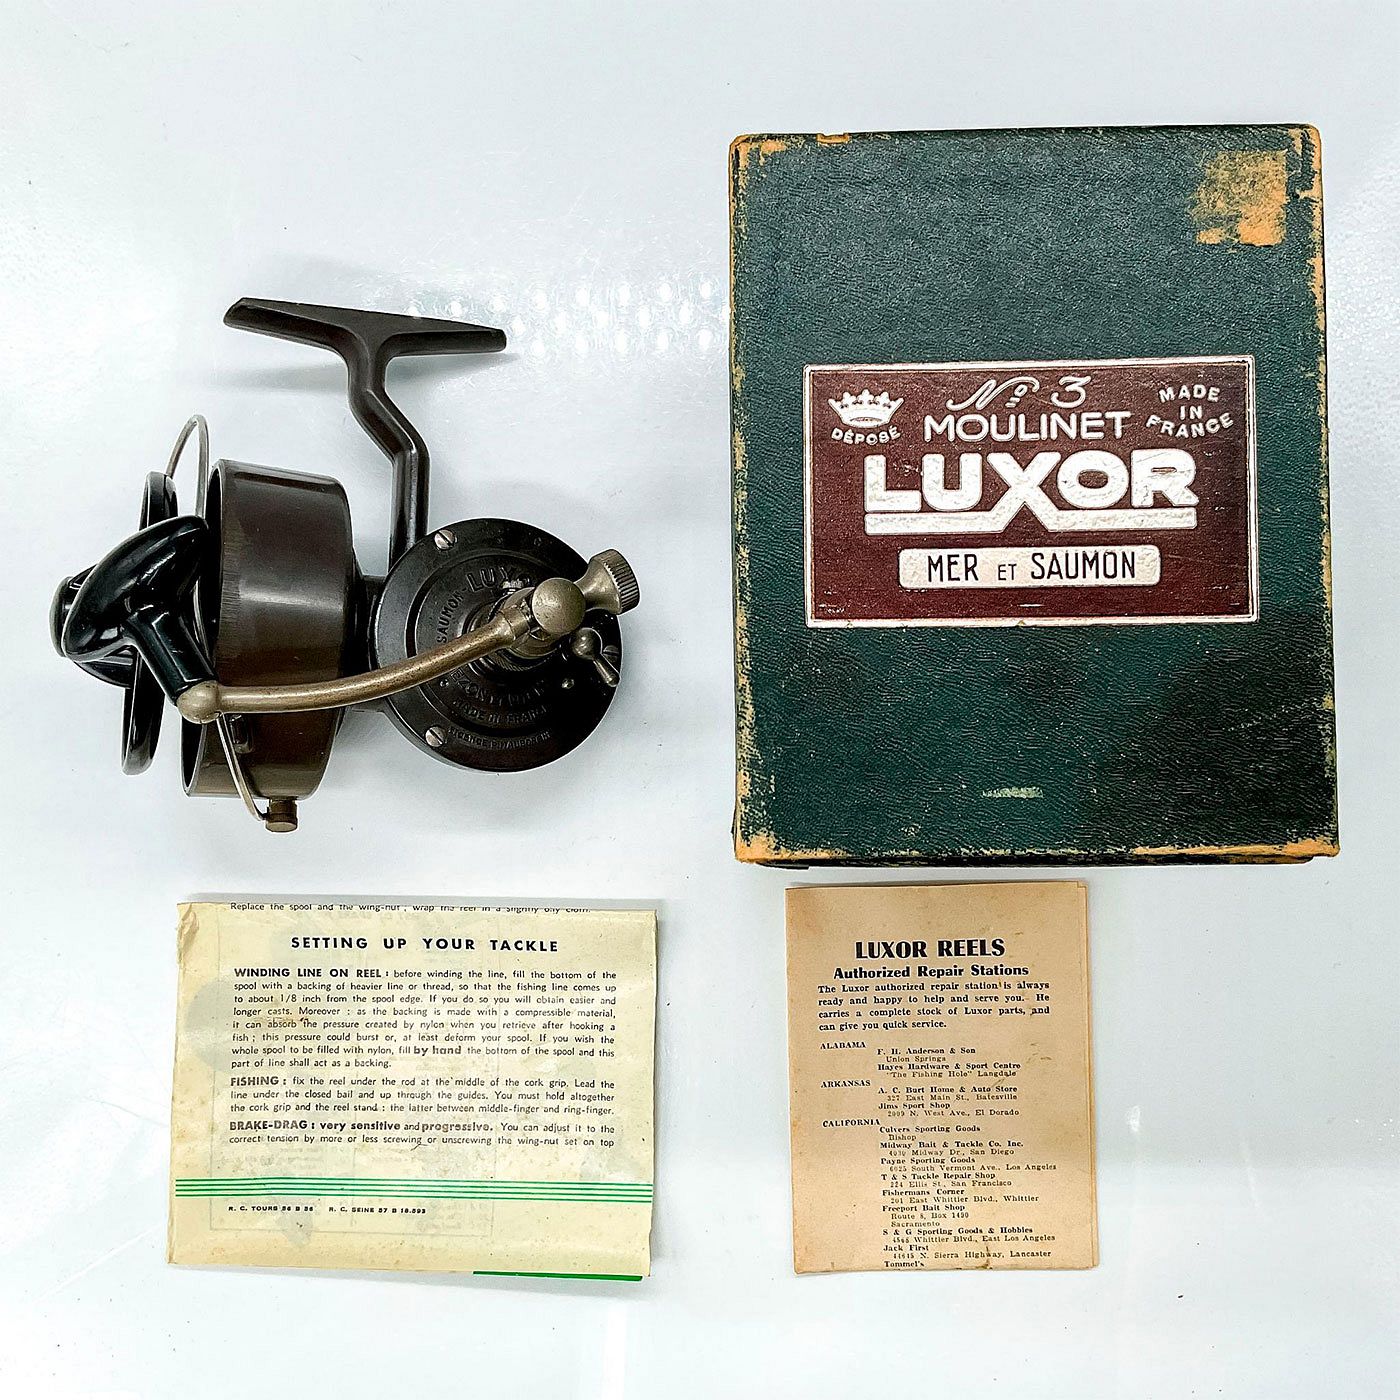 Luxor No. 3 Model C Spinning Reel with Box and Papers sold at auction on  25th June